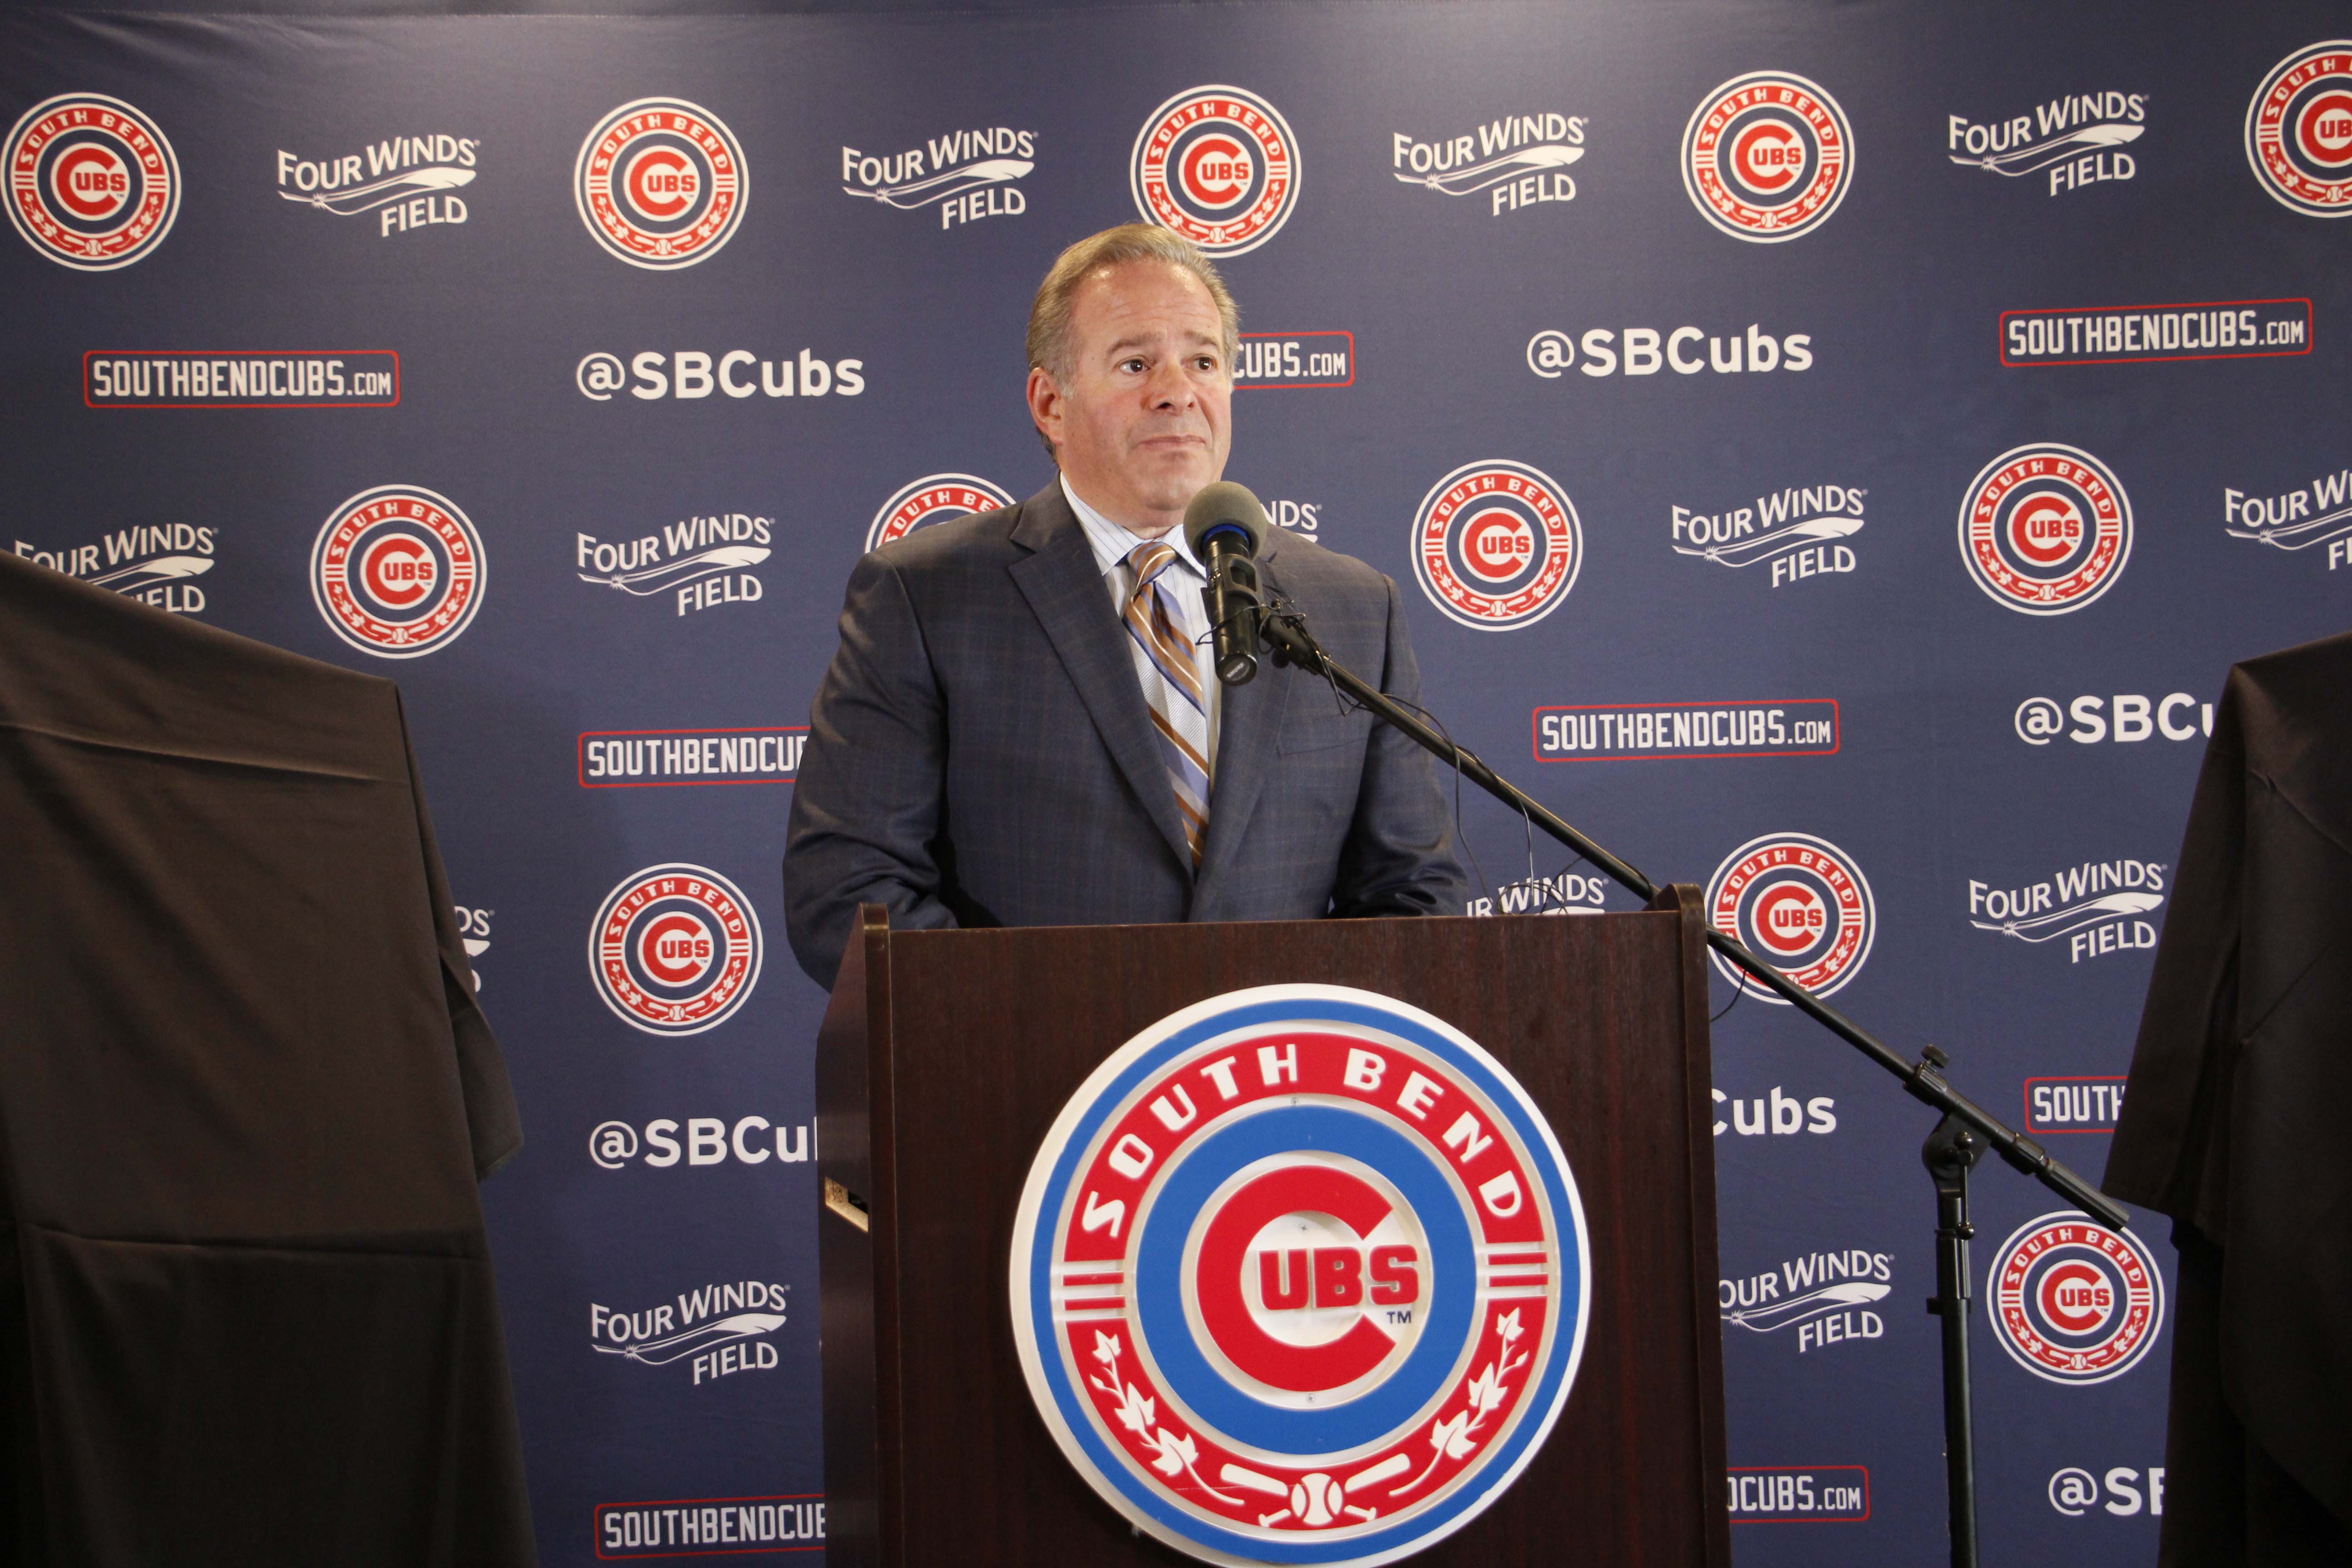 South Bend Cubs Owner Andrew Berlin